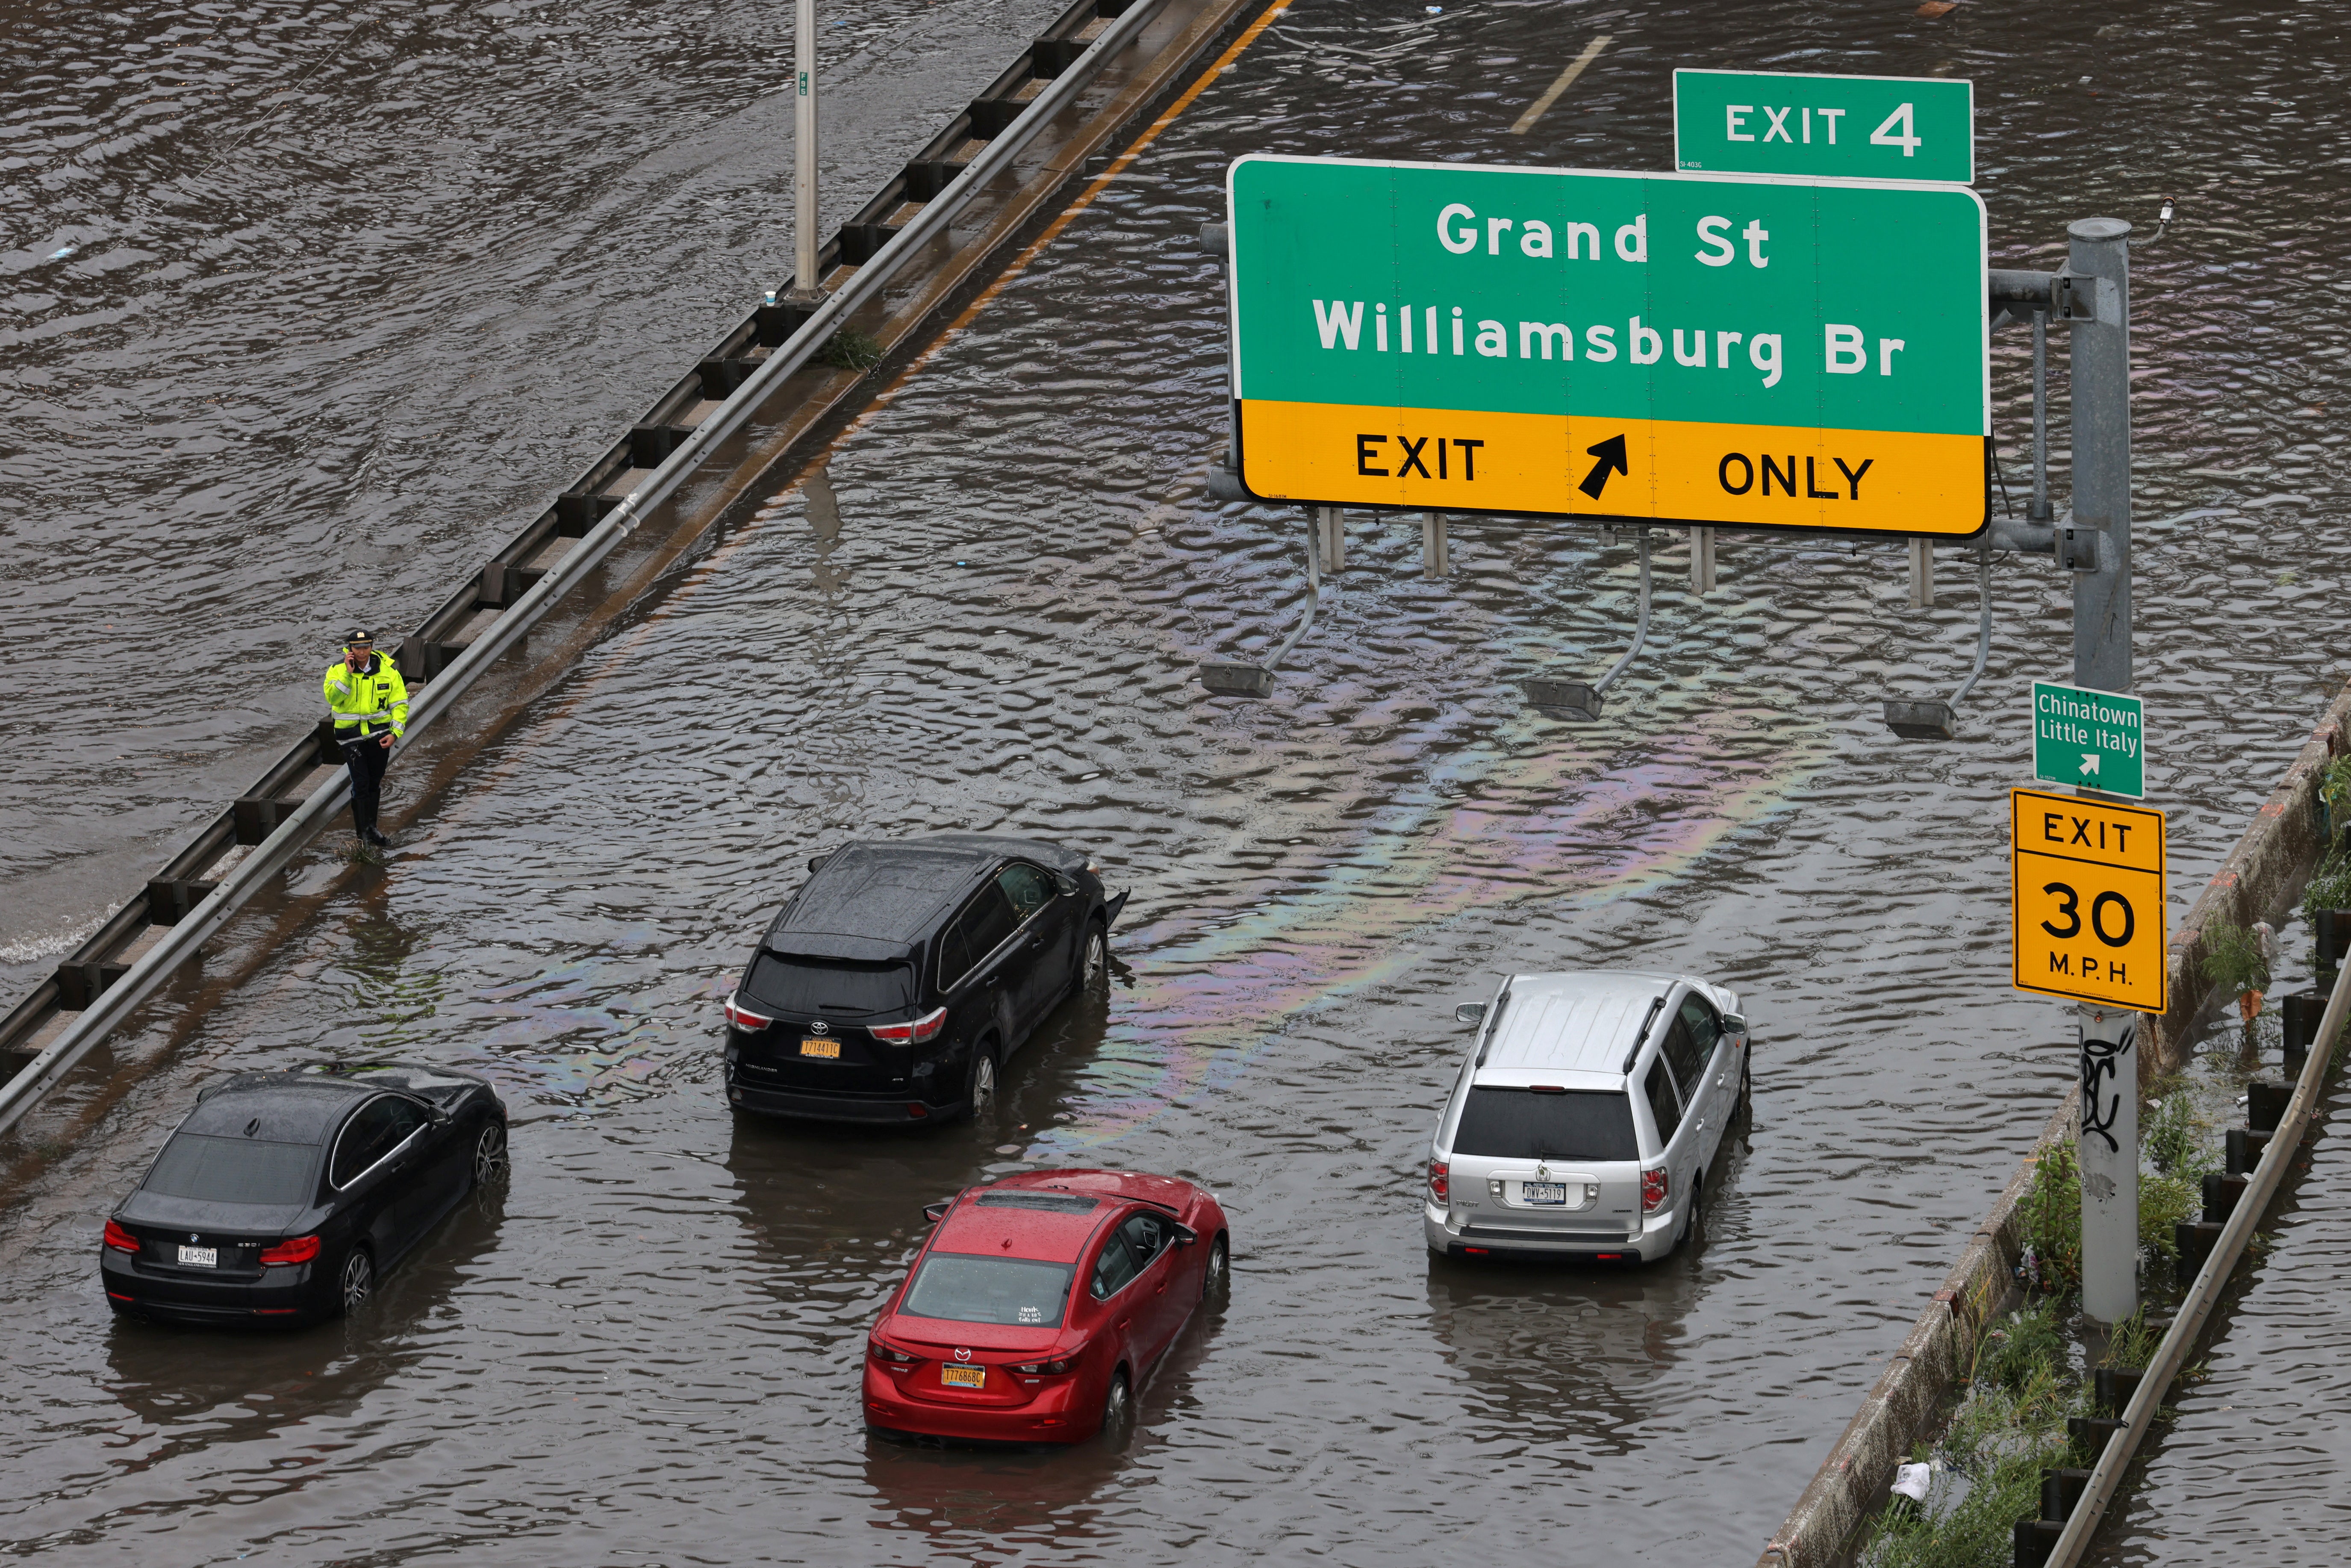 New York City was hit with widespread flashflooding just days ago